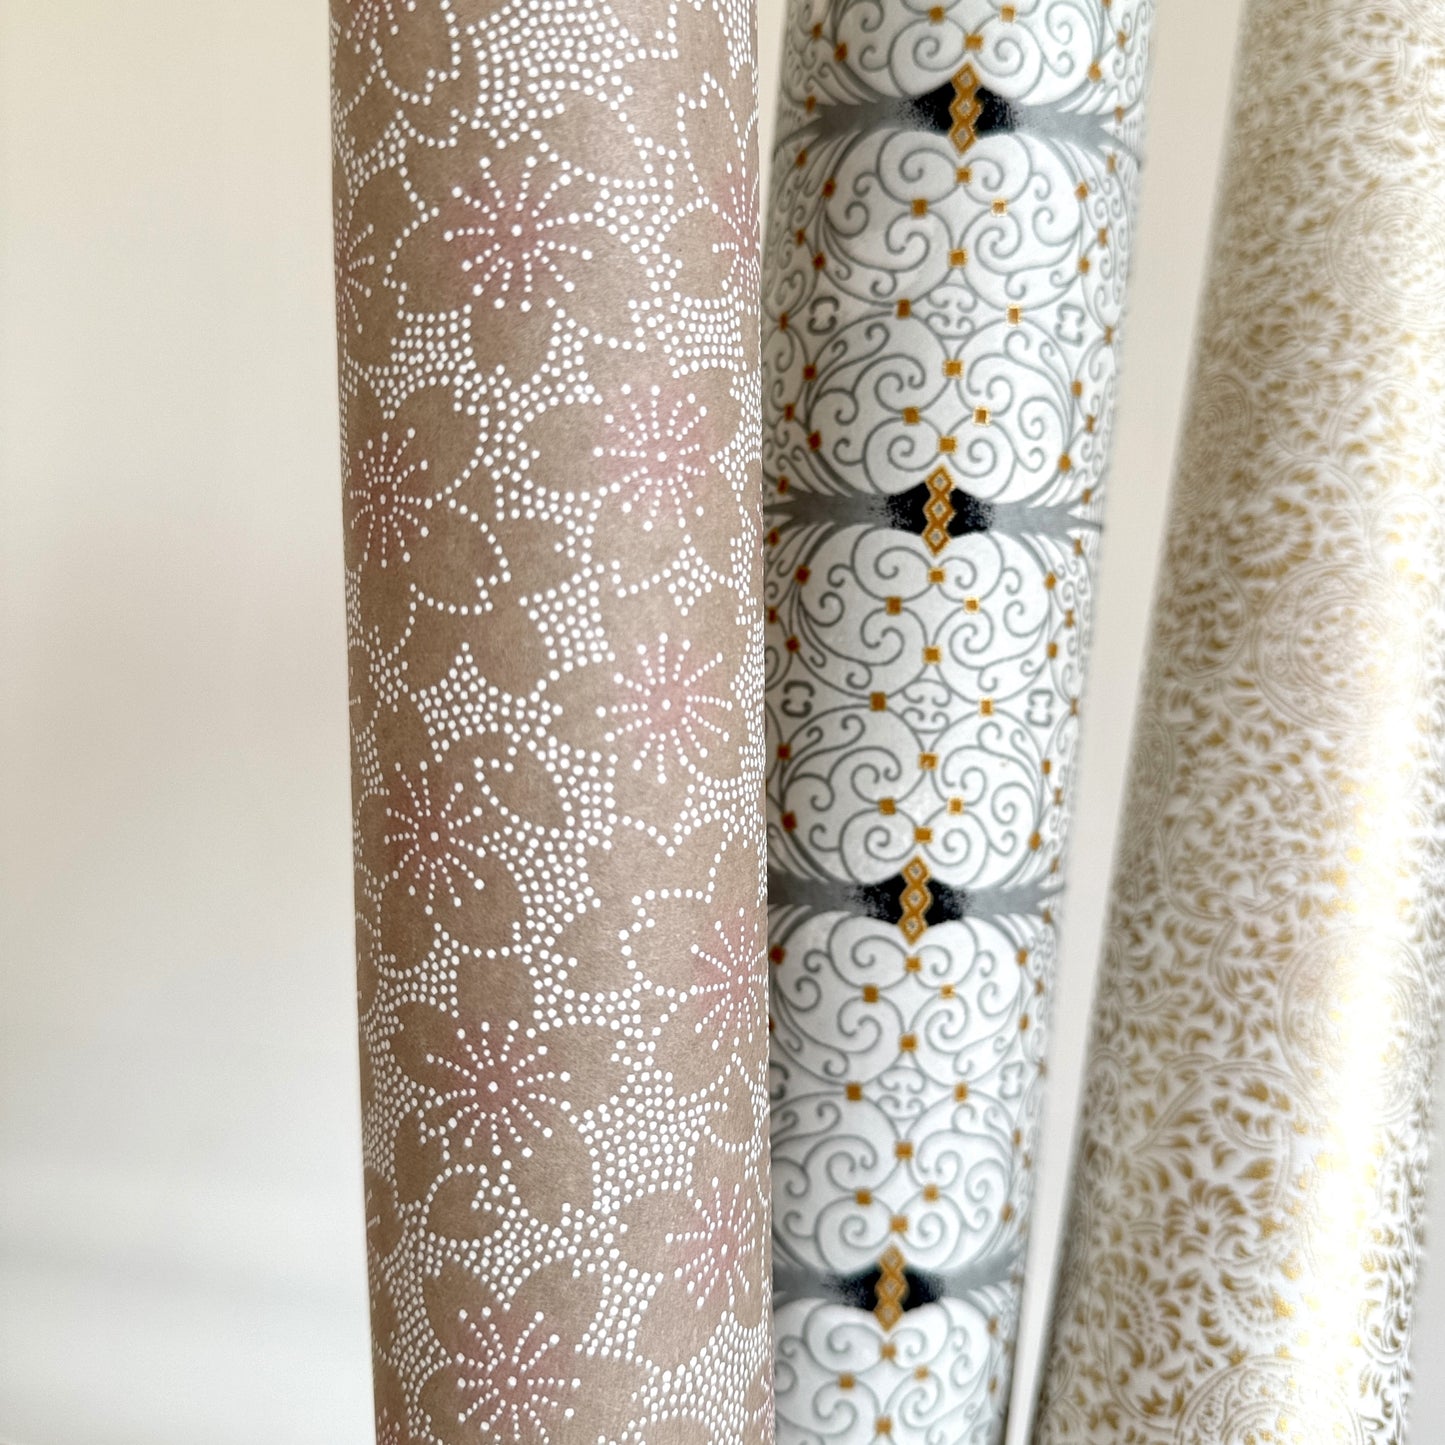 Japanese silkscreen chiyogami paper with a repeat pattern of cherry blossom flowers in taupe and white, pictured rolled with other designs